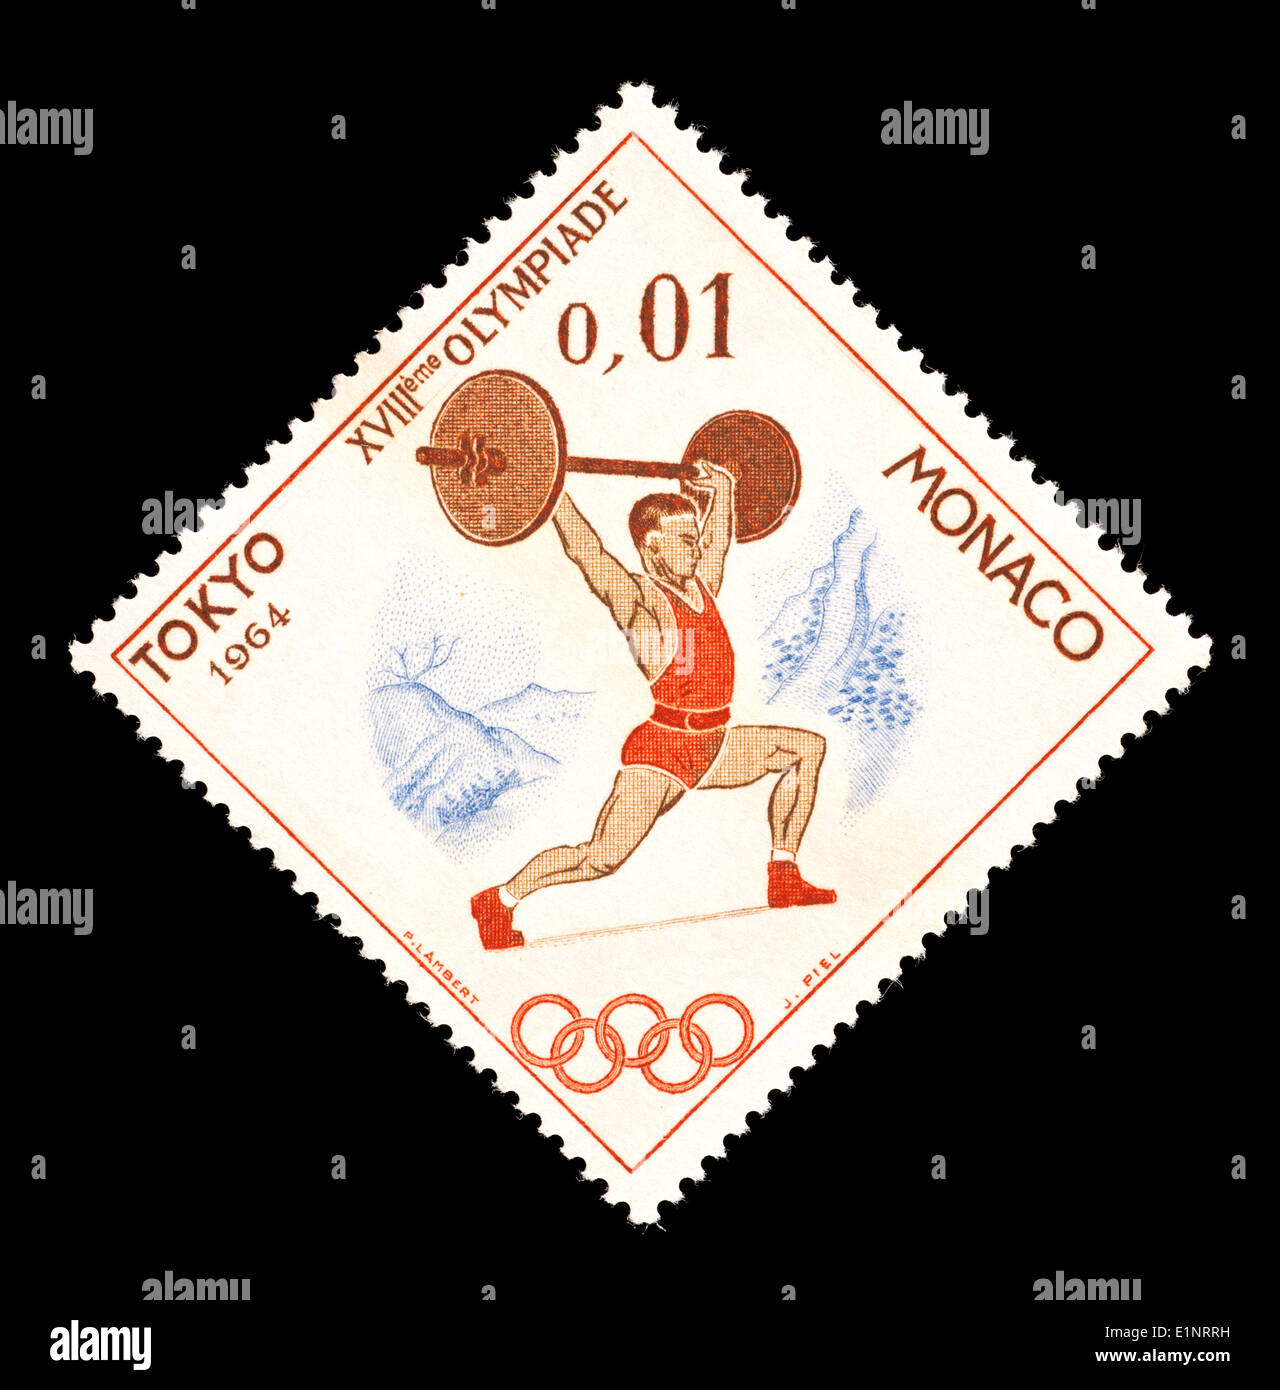 Postage stamp from Monaco depicting a weightlifter, issued for the 1964 Summer Olympics in Tokyo. Stock Photo